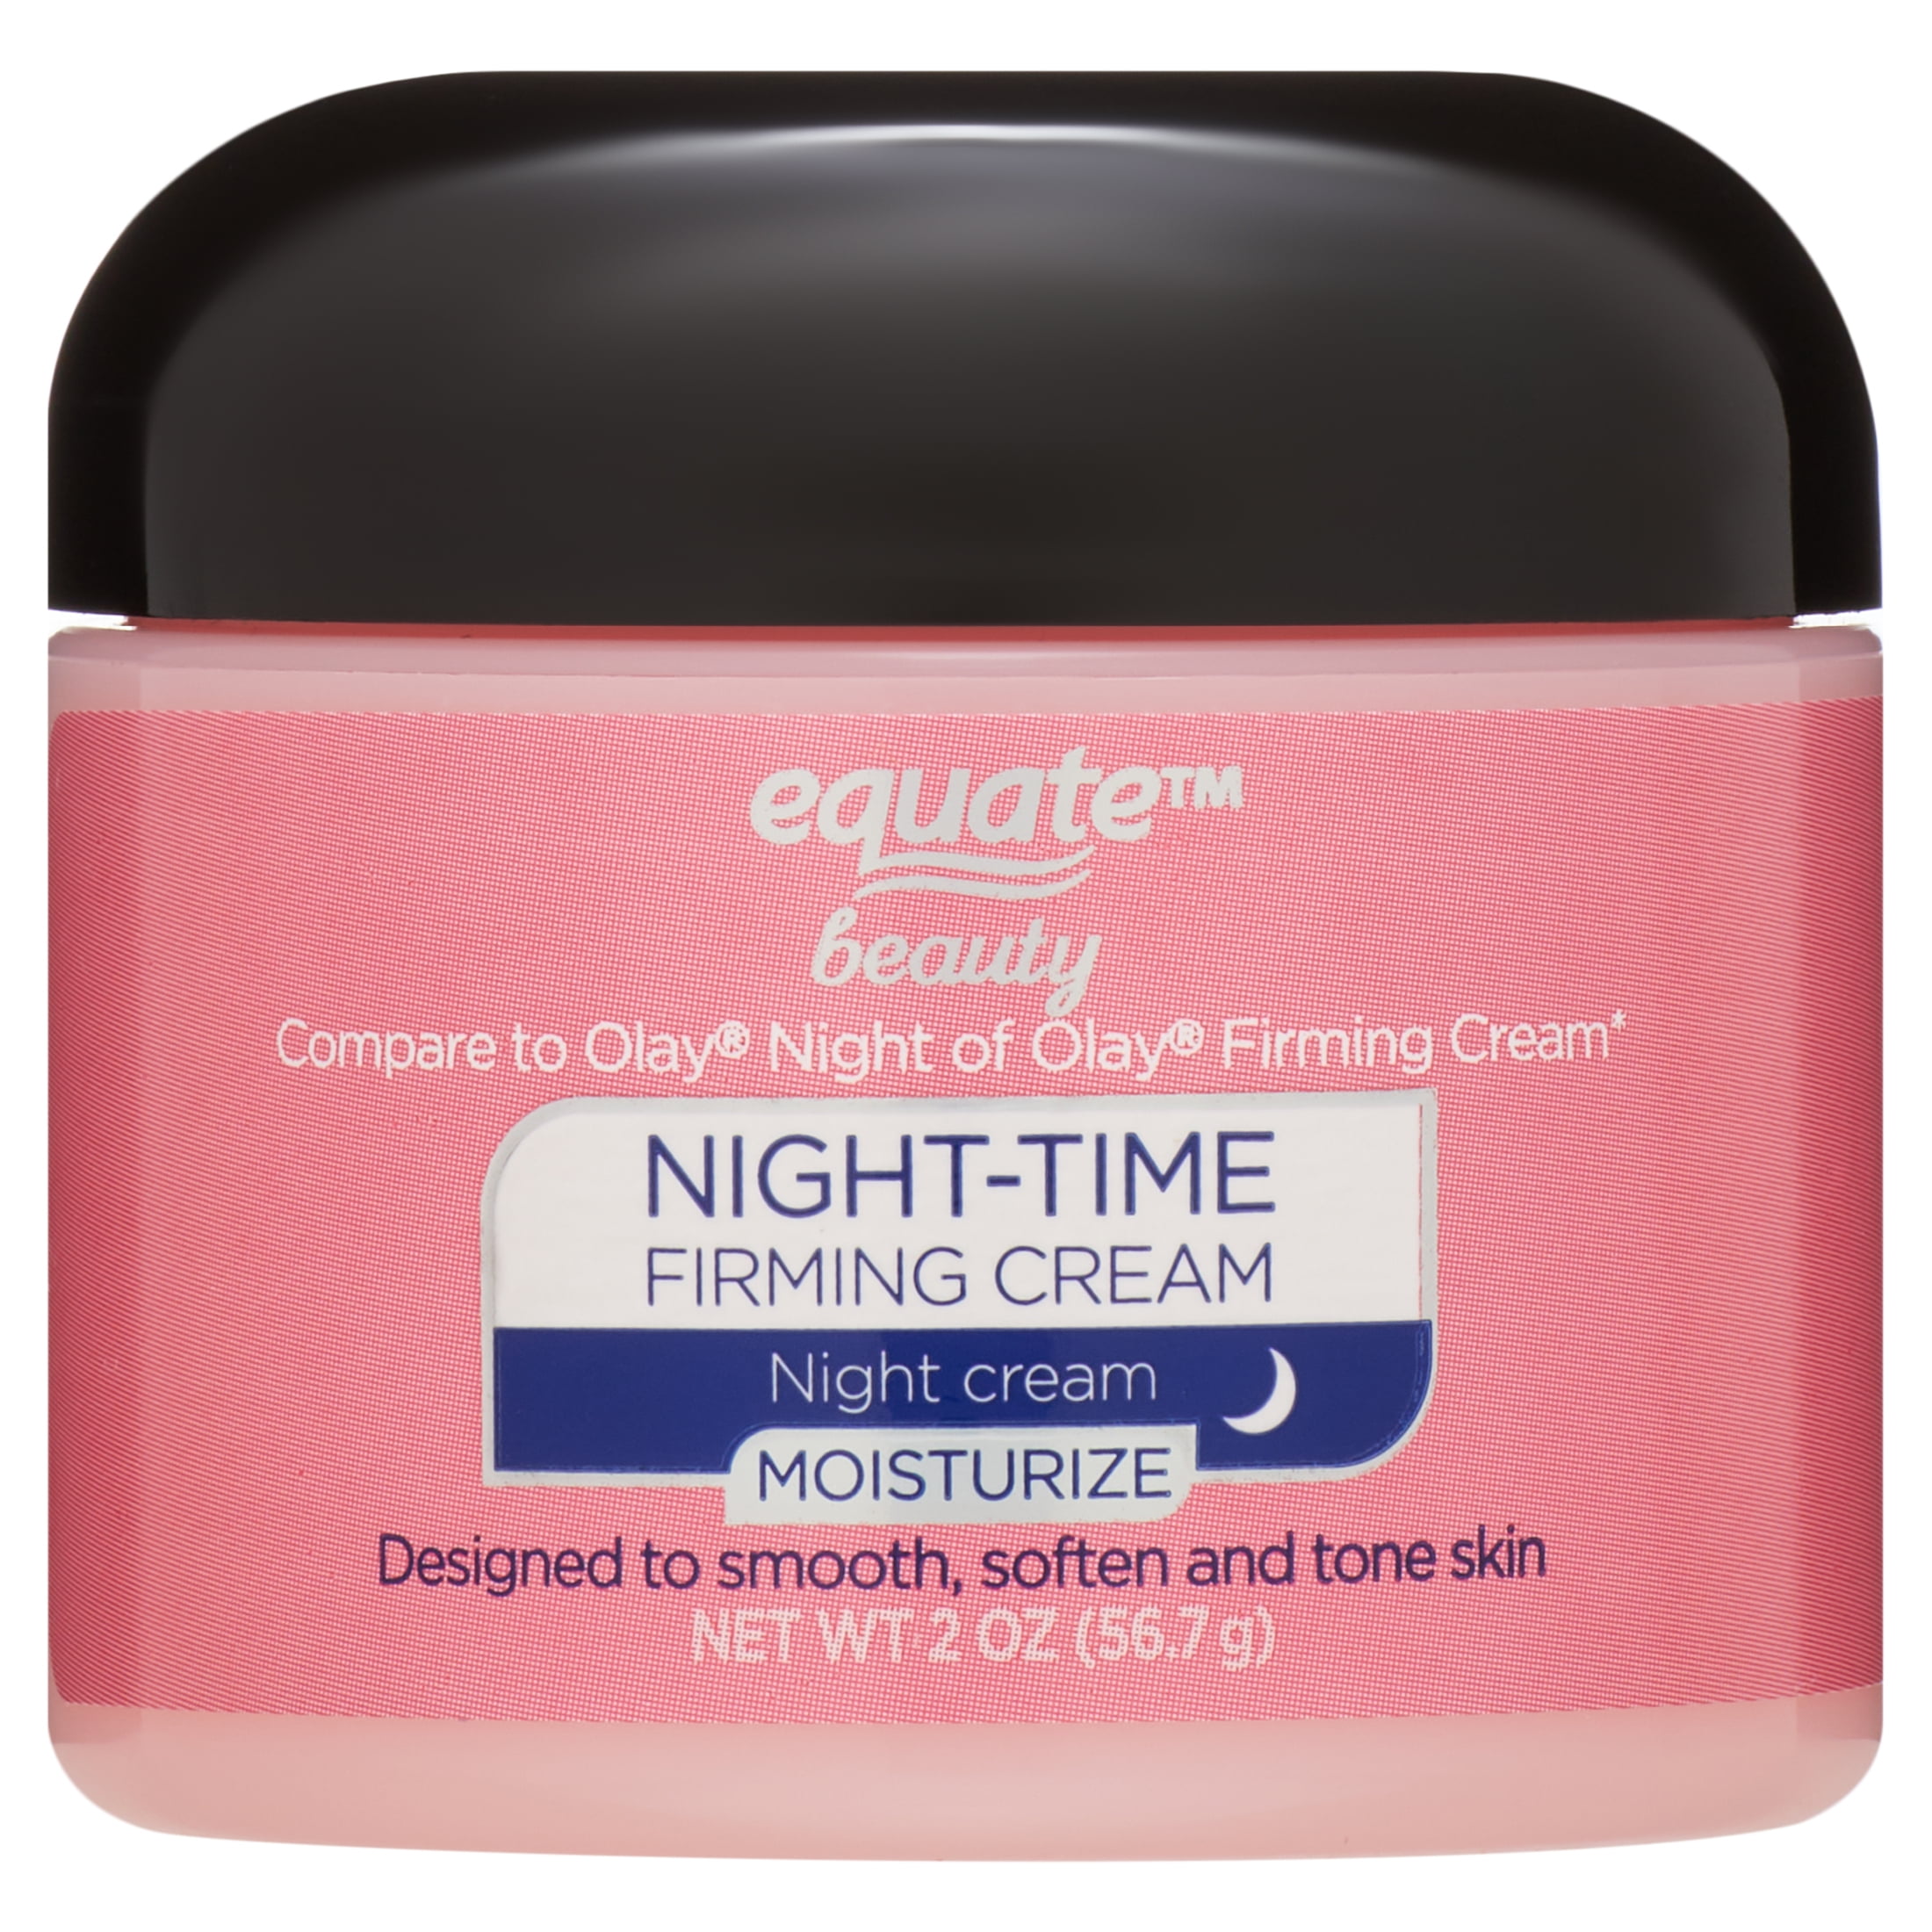 Equate Beauty Night Time Firming Moisturize Face Cream, Oil Free, 2 oz picture image